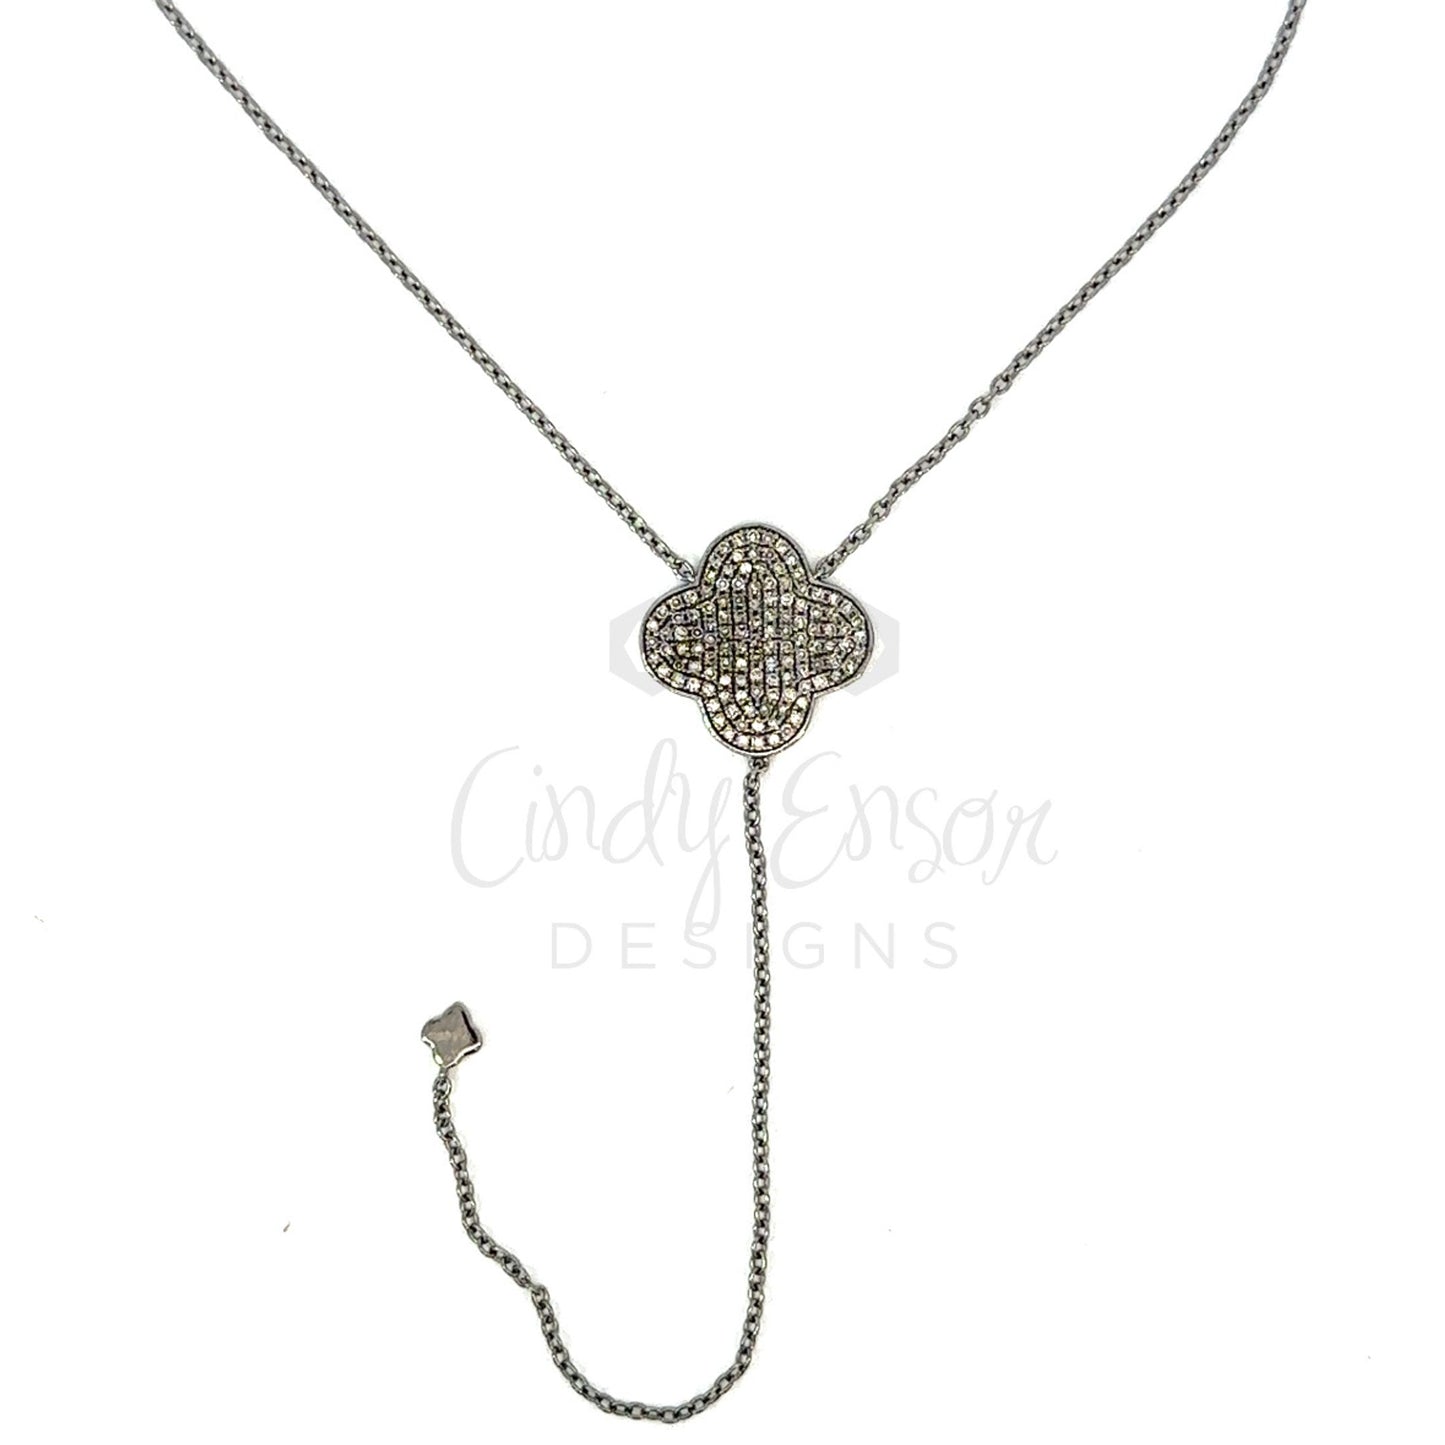 Y Drop Necklace with Pave Diamond Clover